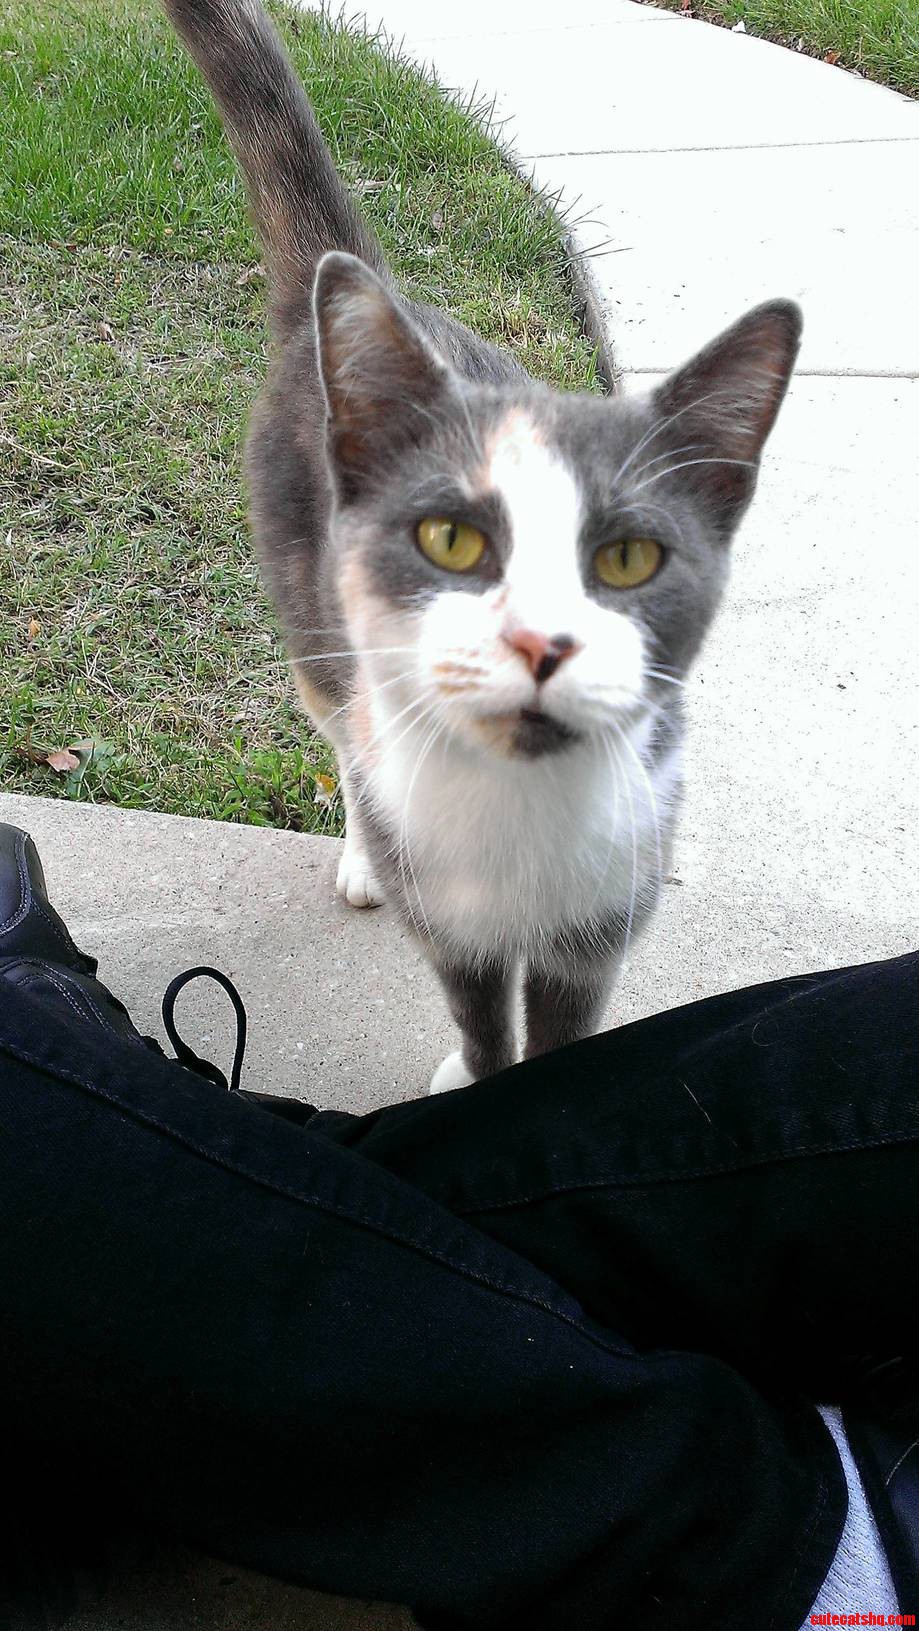 Beautiful stray babygirl has taken a liking to my porch. them eyes though